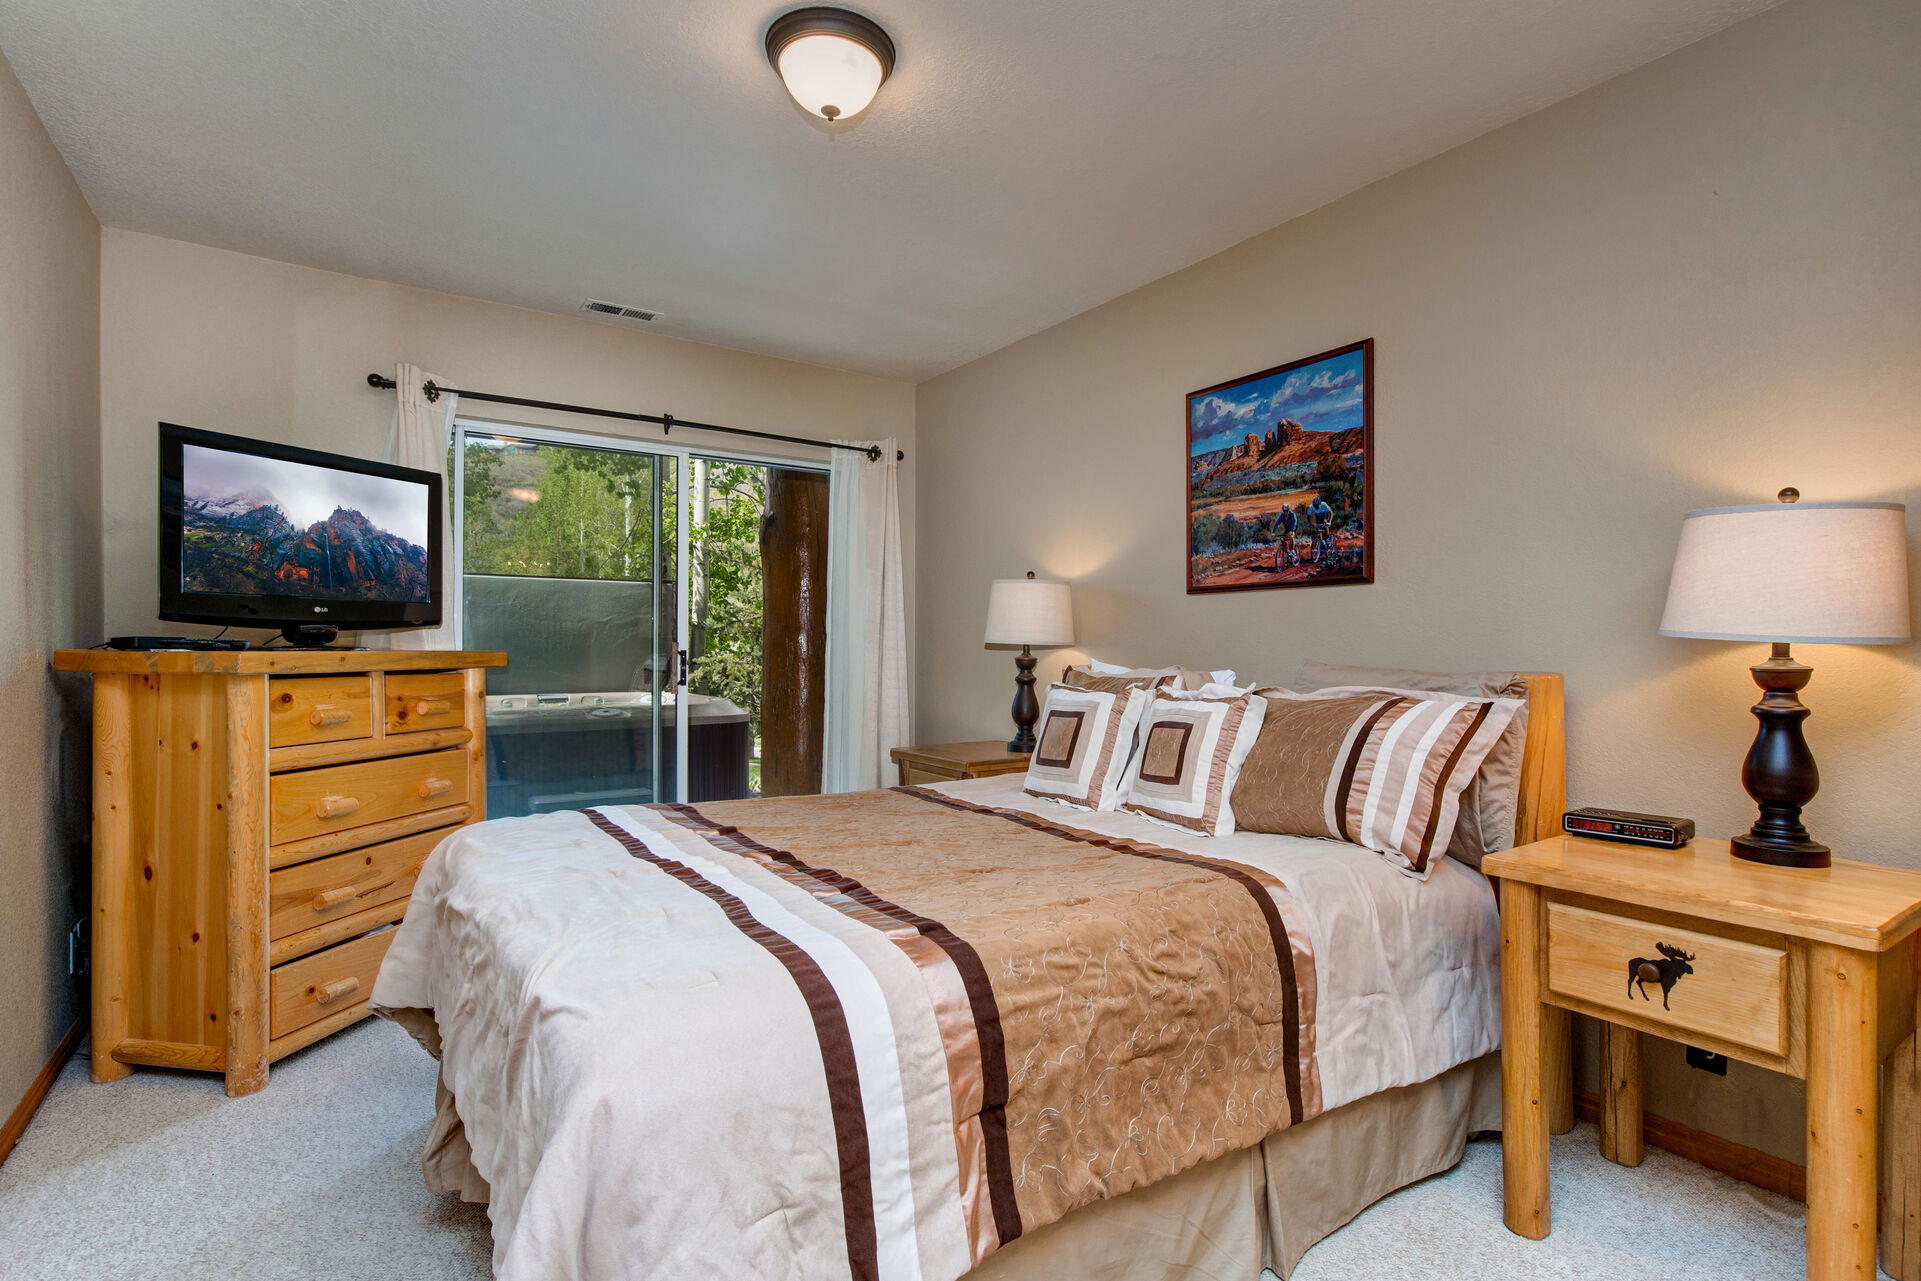 Lower Level Master Bedroom with queen bed, LG smart tv, private hot tub patio access, and en suite bathroom